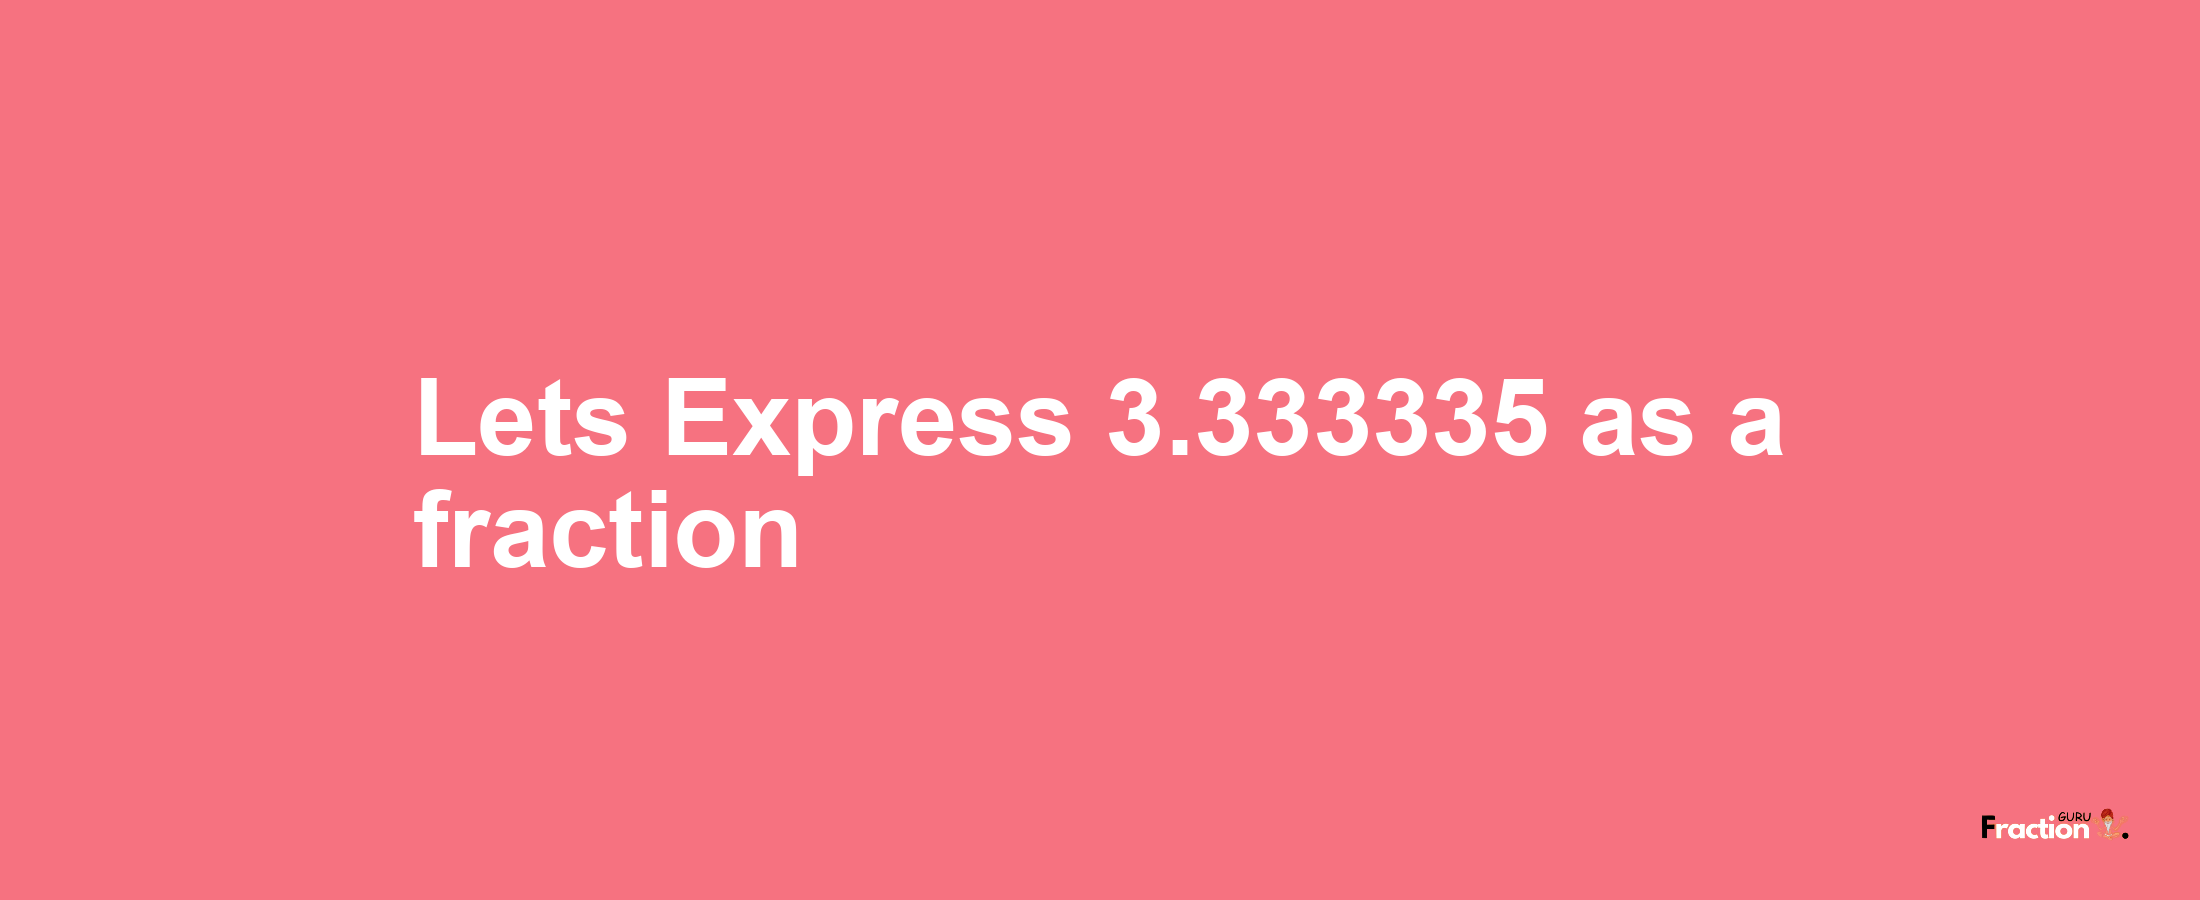 Lets Express 3.333335 as afraction